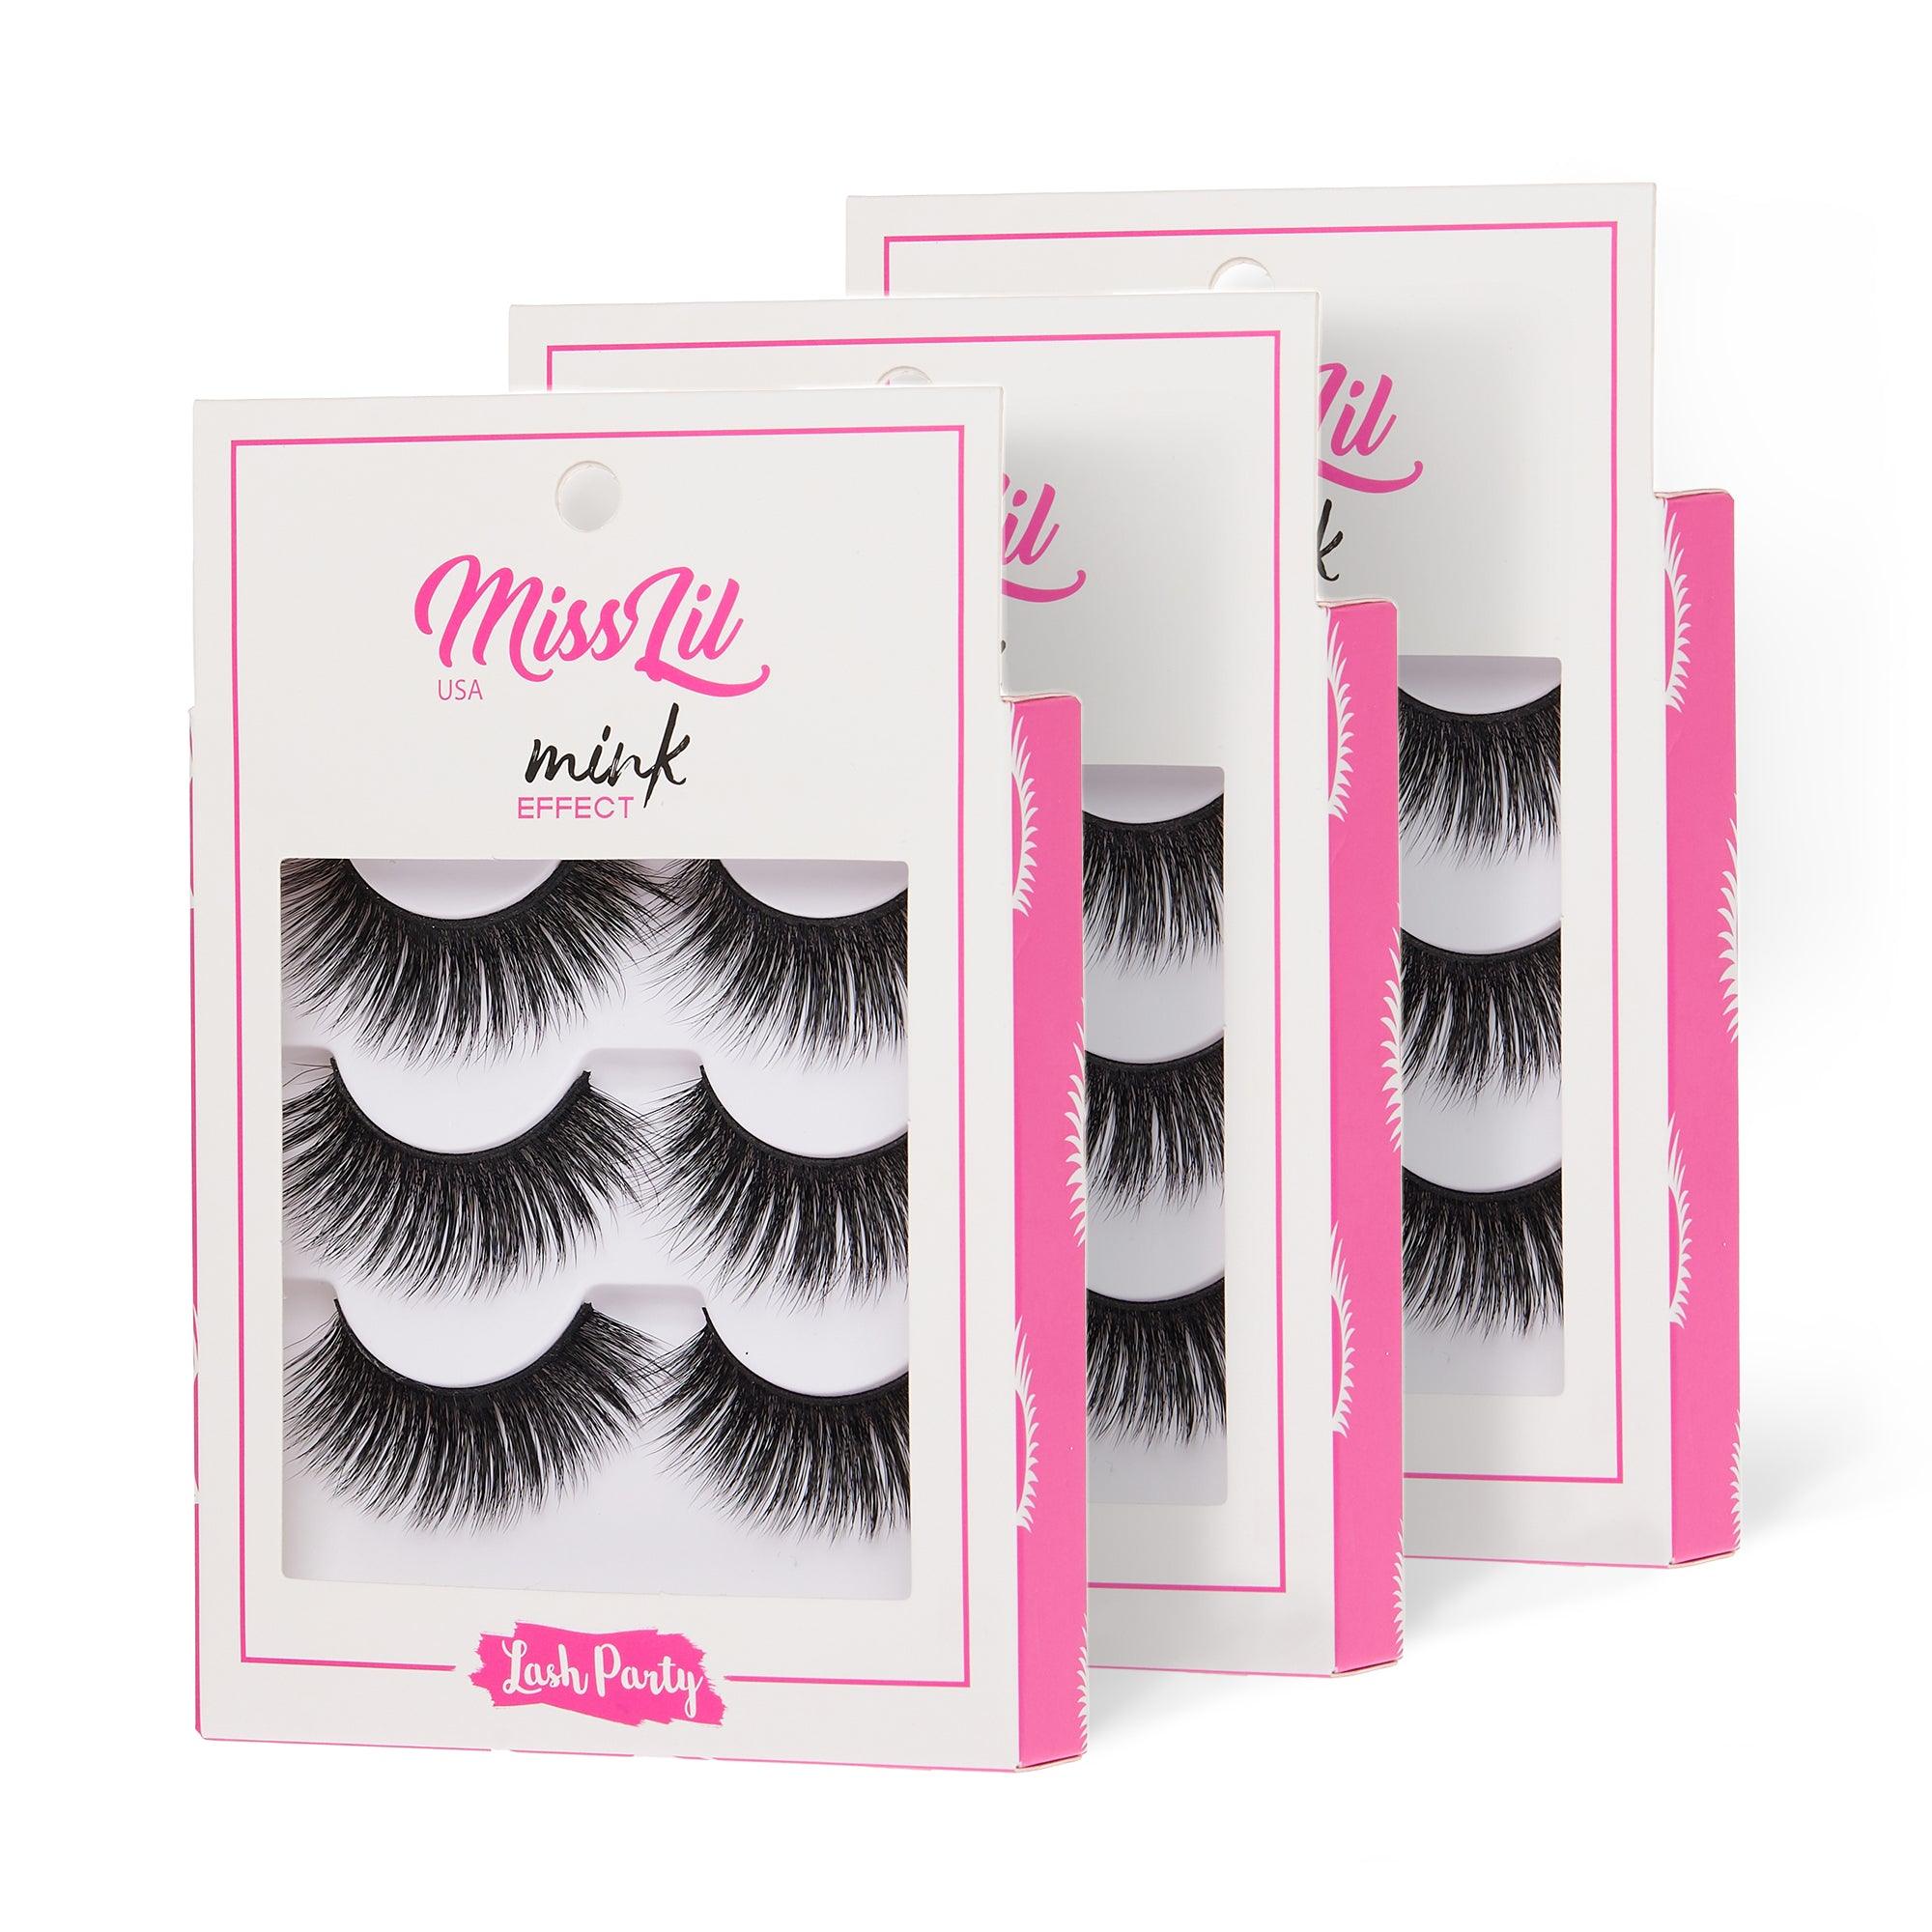 3-Pair Faux Mink Effect Eyelashes - Lash Party Collection #7 - Pack of 3 - Miss Lil USA